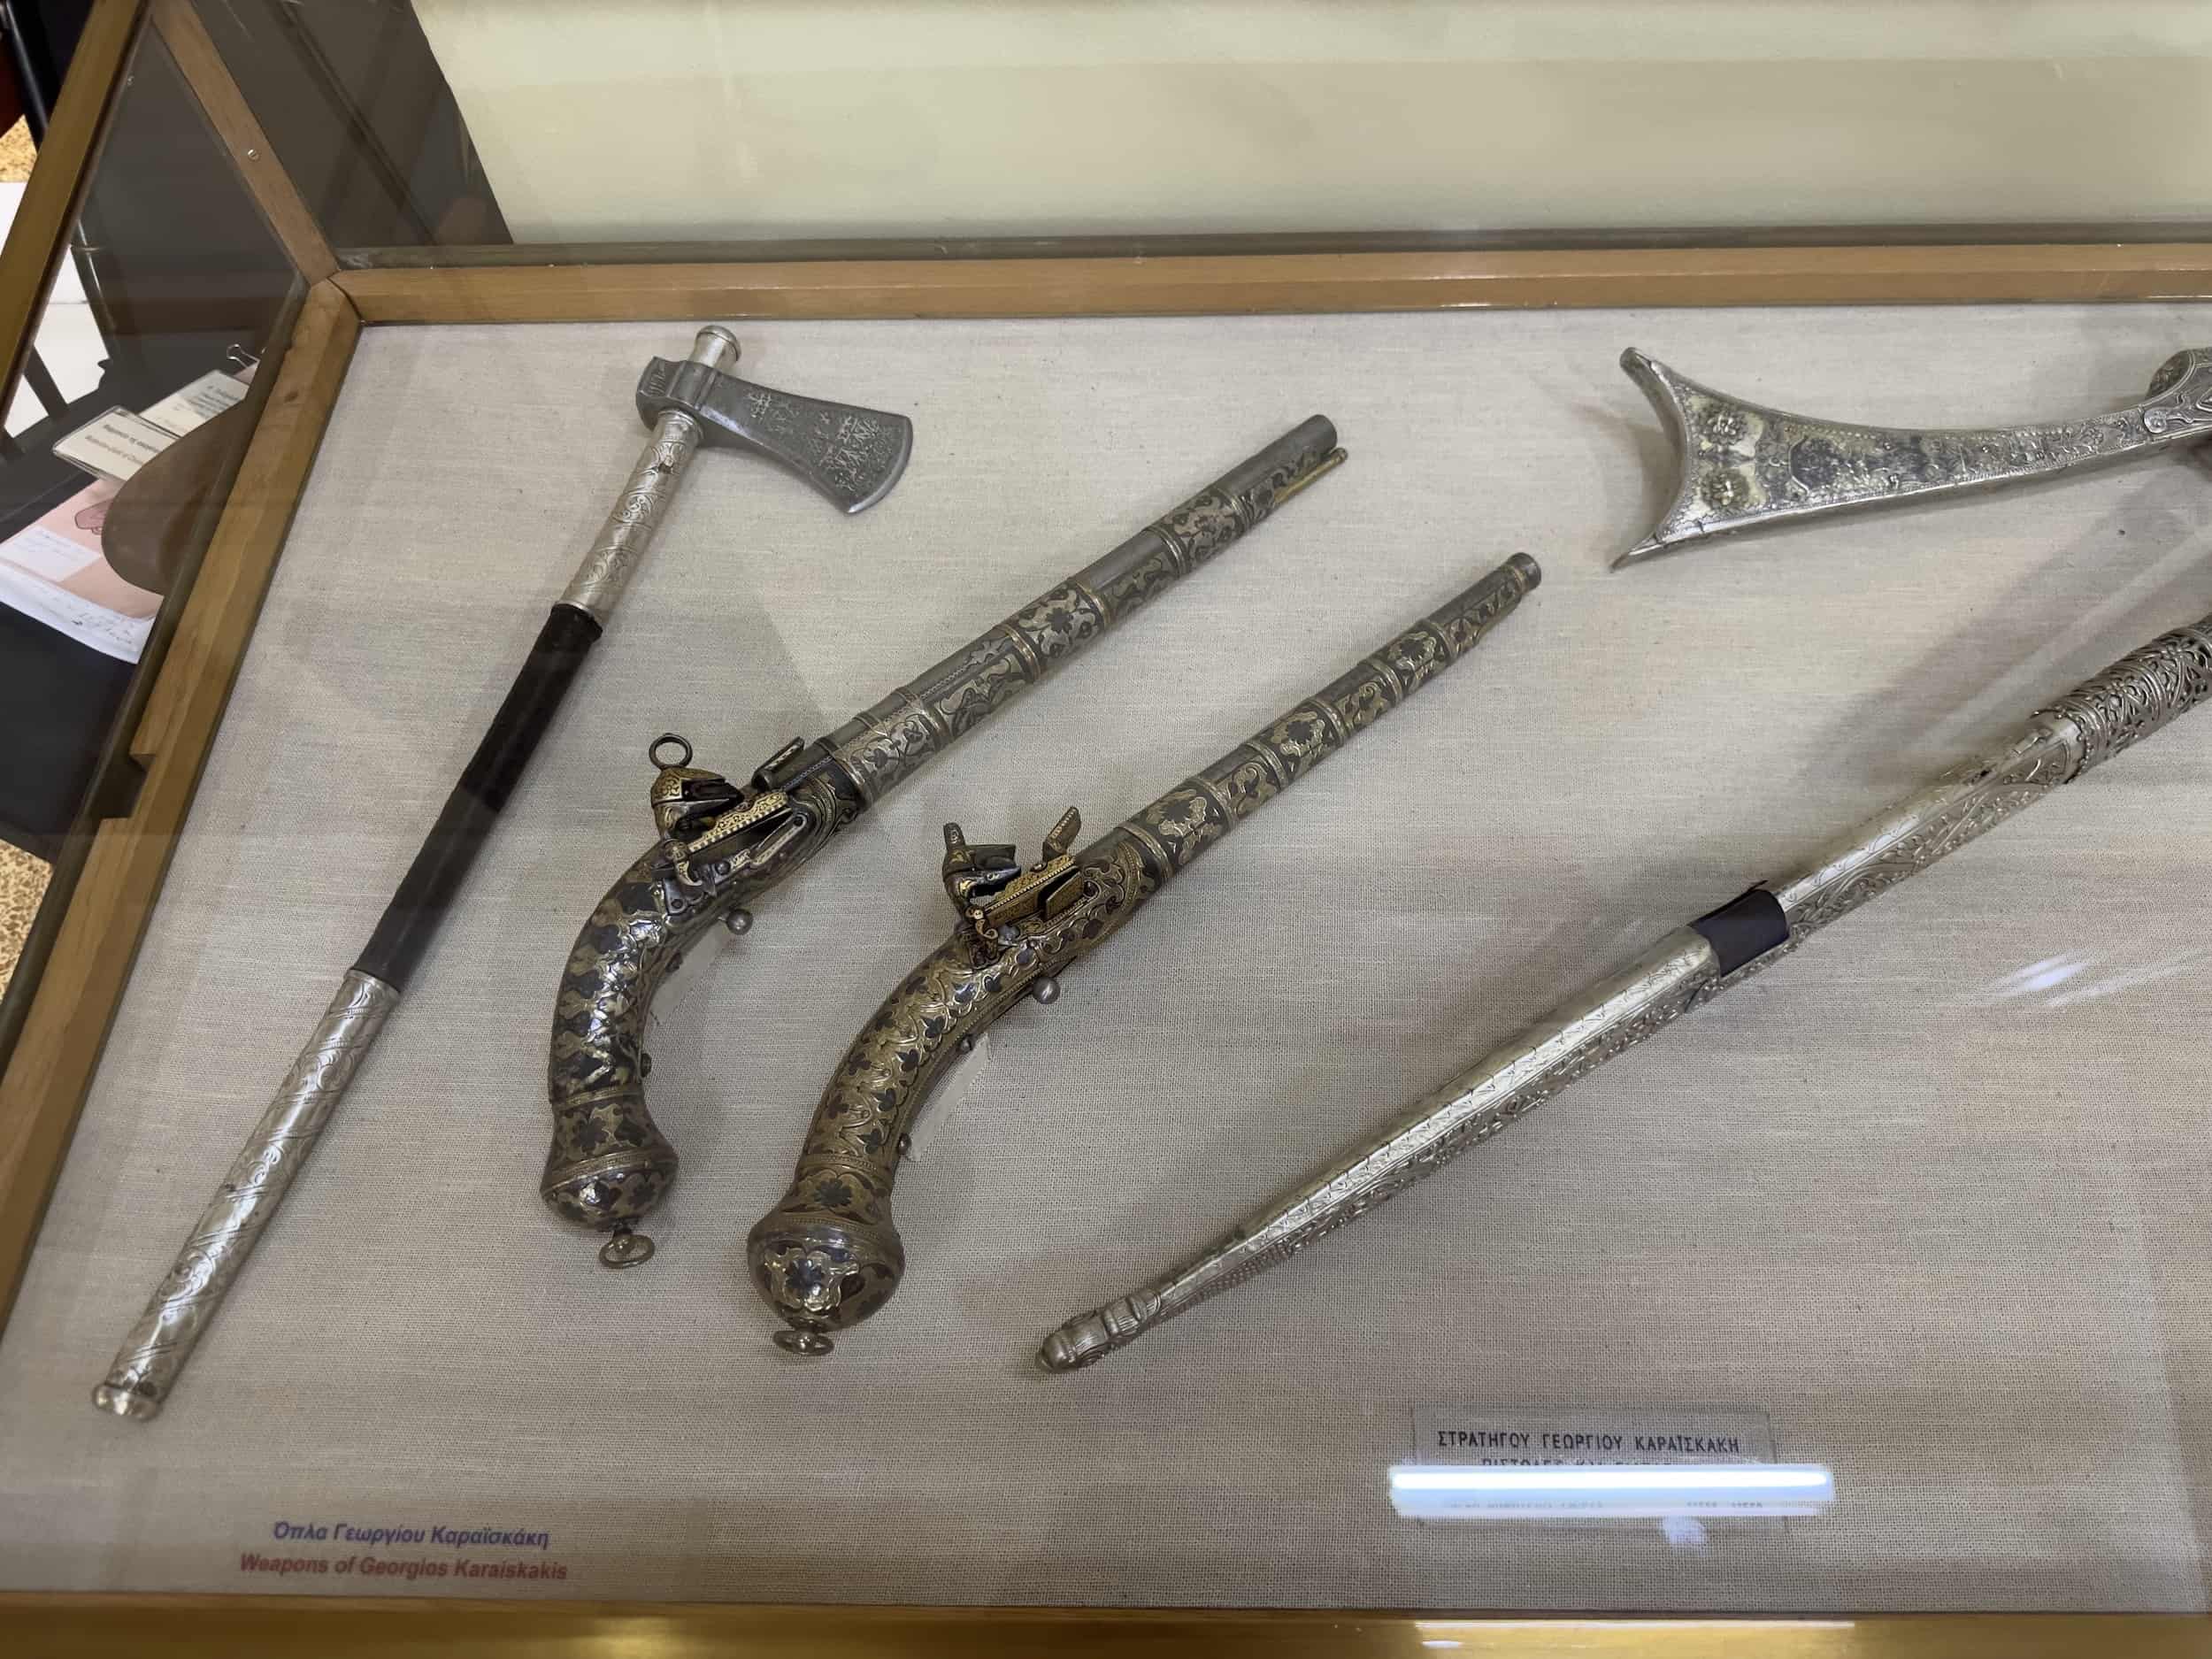 Pistols and axe belonging to Georgios Karaiskakis (1782-1827) at the National Historical Museum in Athens, Greece